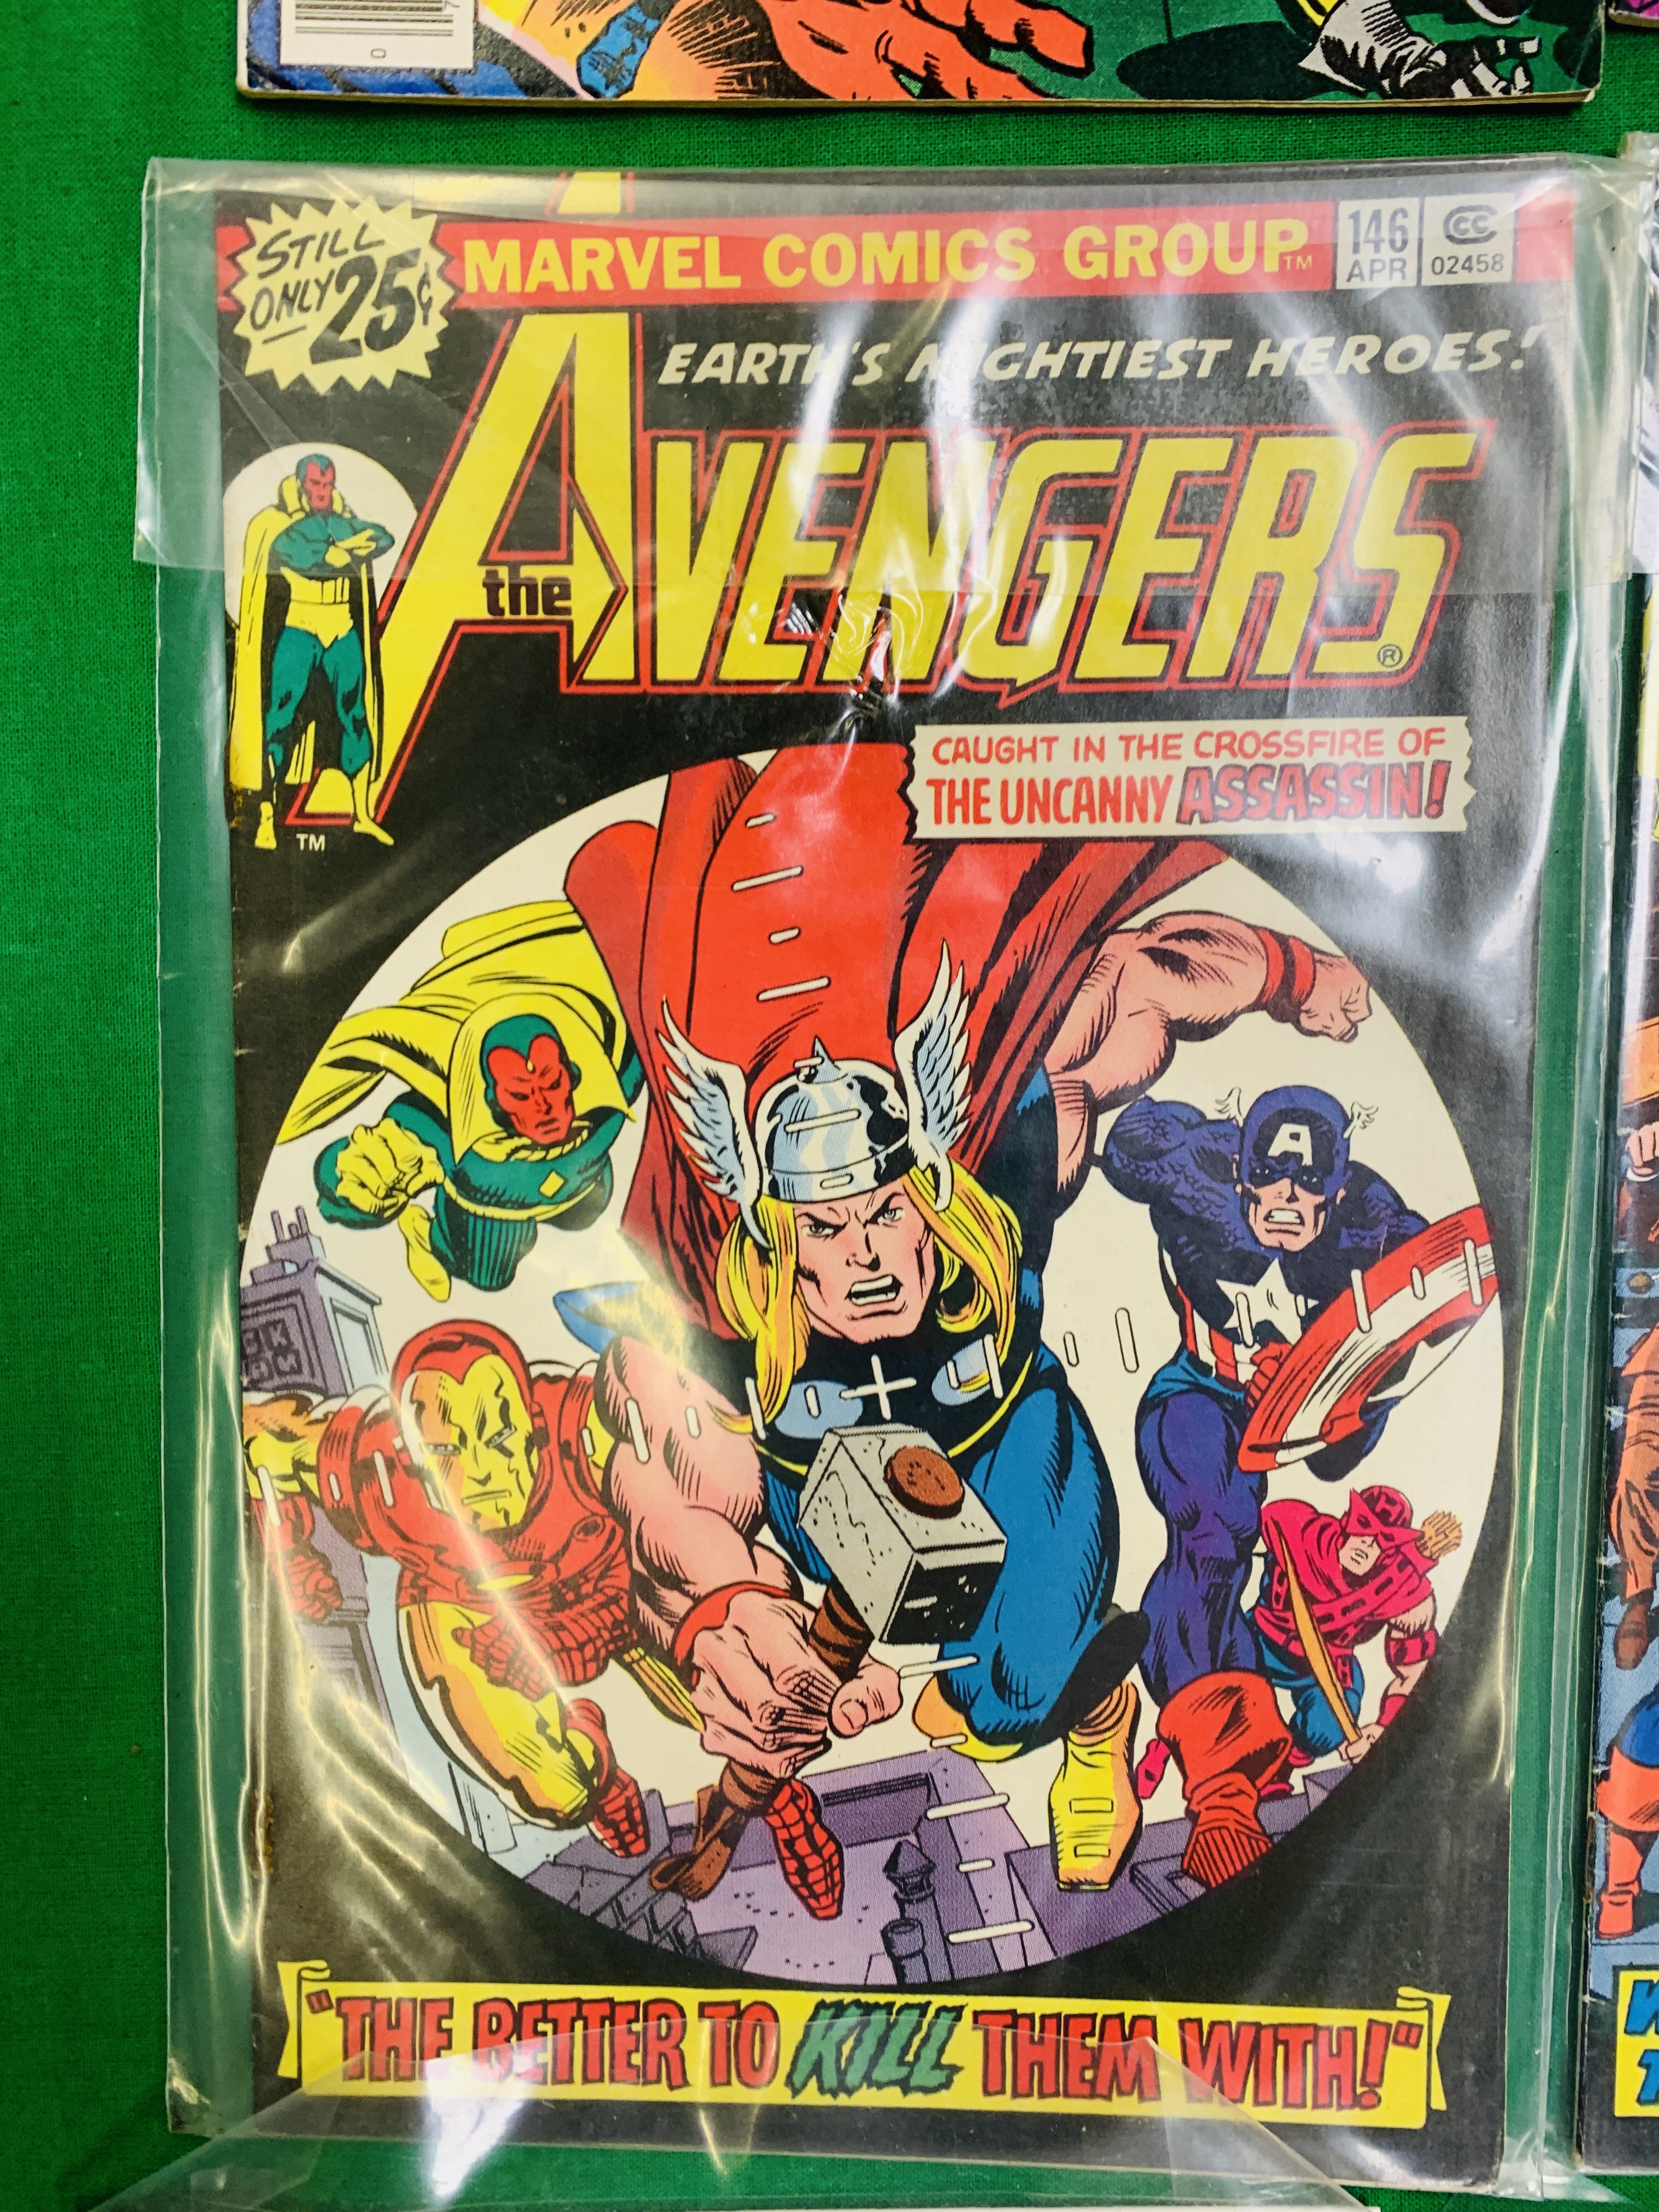 MARVEL COMICS THE AVENGERS NO. 101 - 299, MISSING ISSUES 103 AND 110. - Image 32 of 130